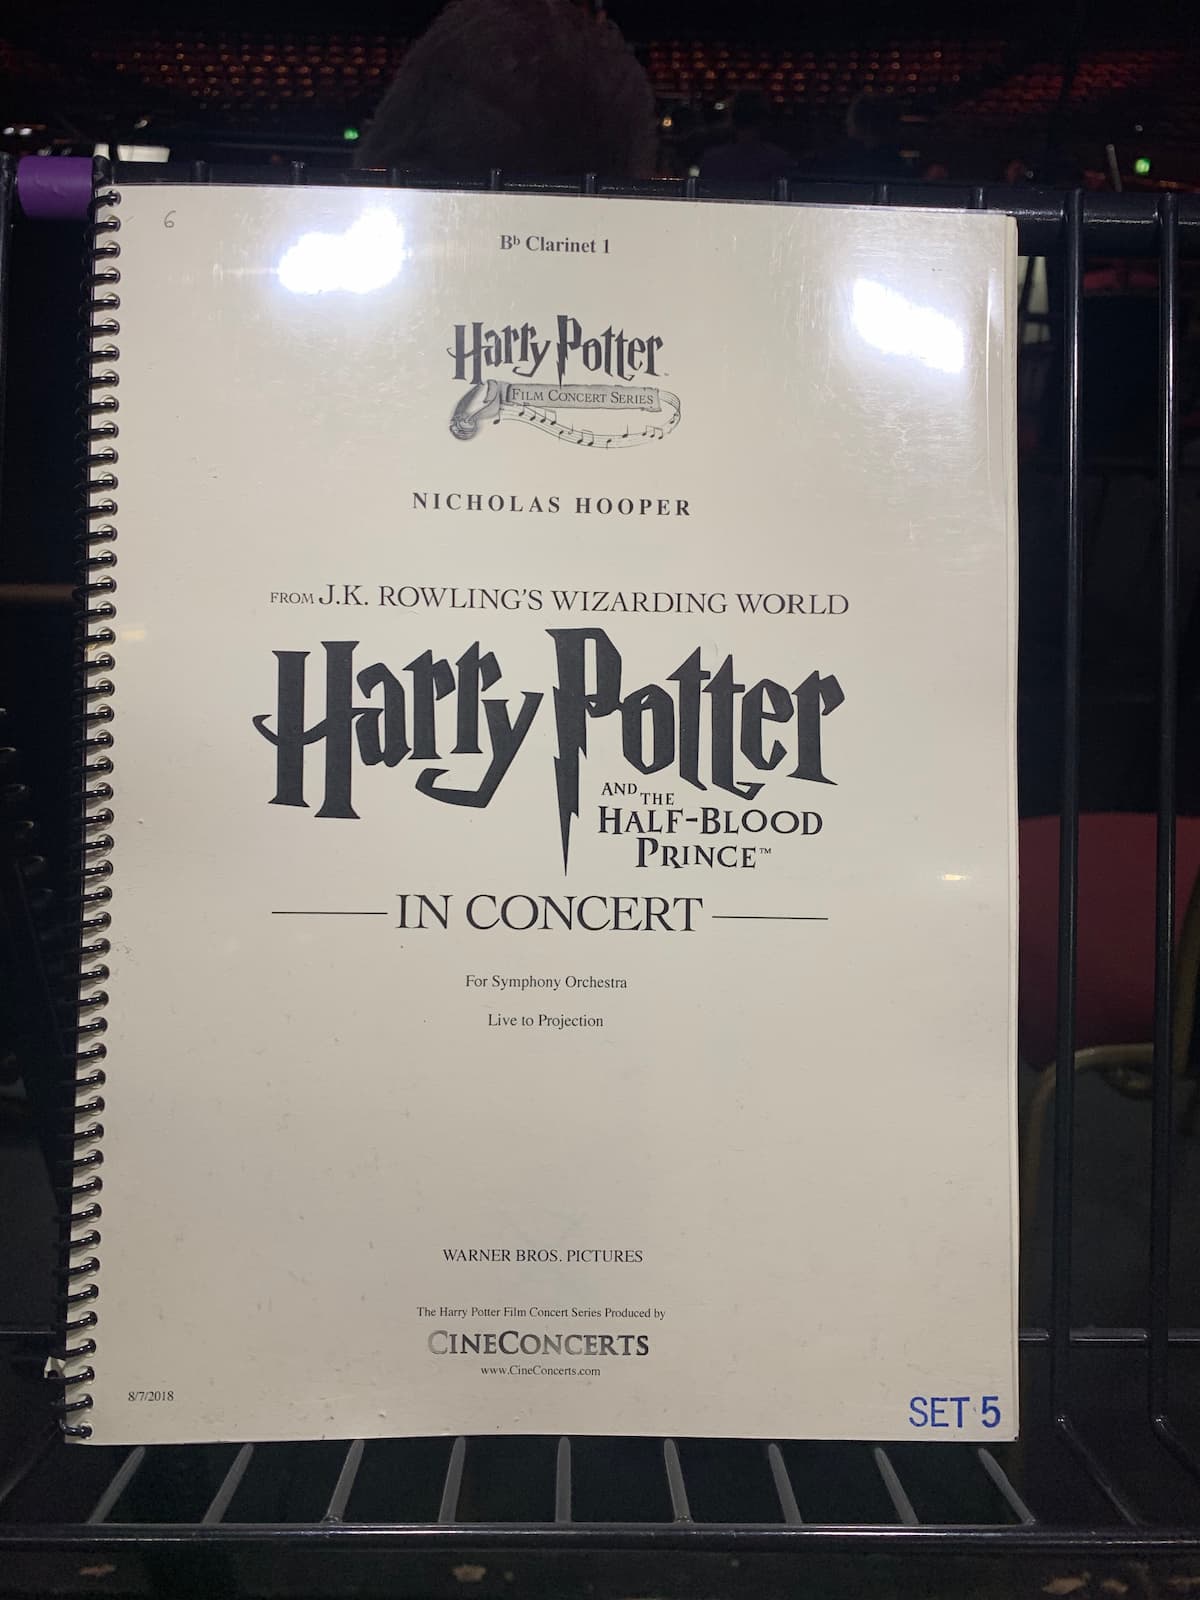 Photo showing the orchestral parts music score of Harry Potter and the Half-Blood Prince